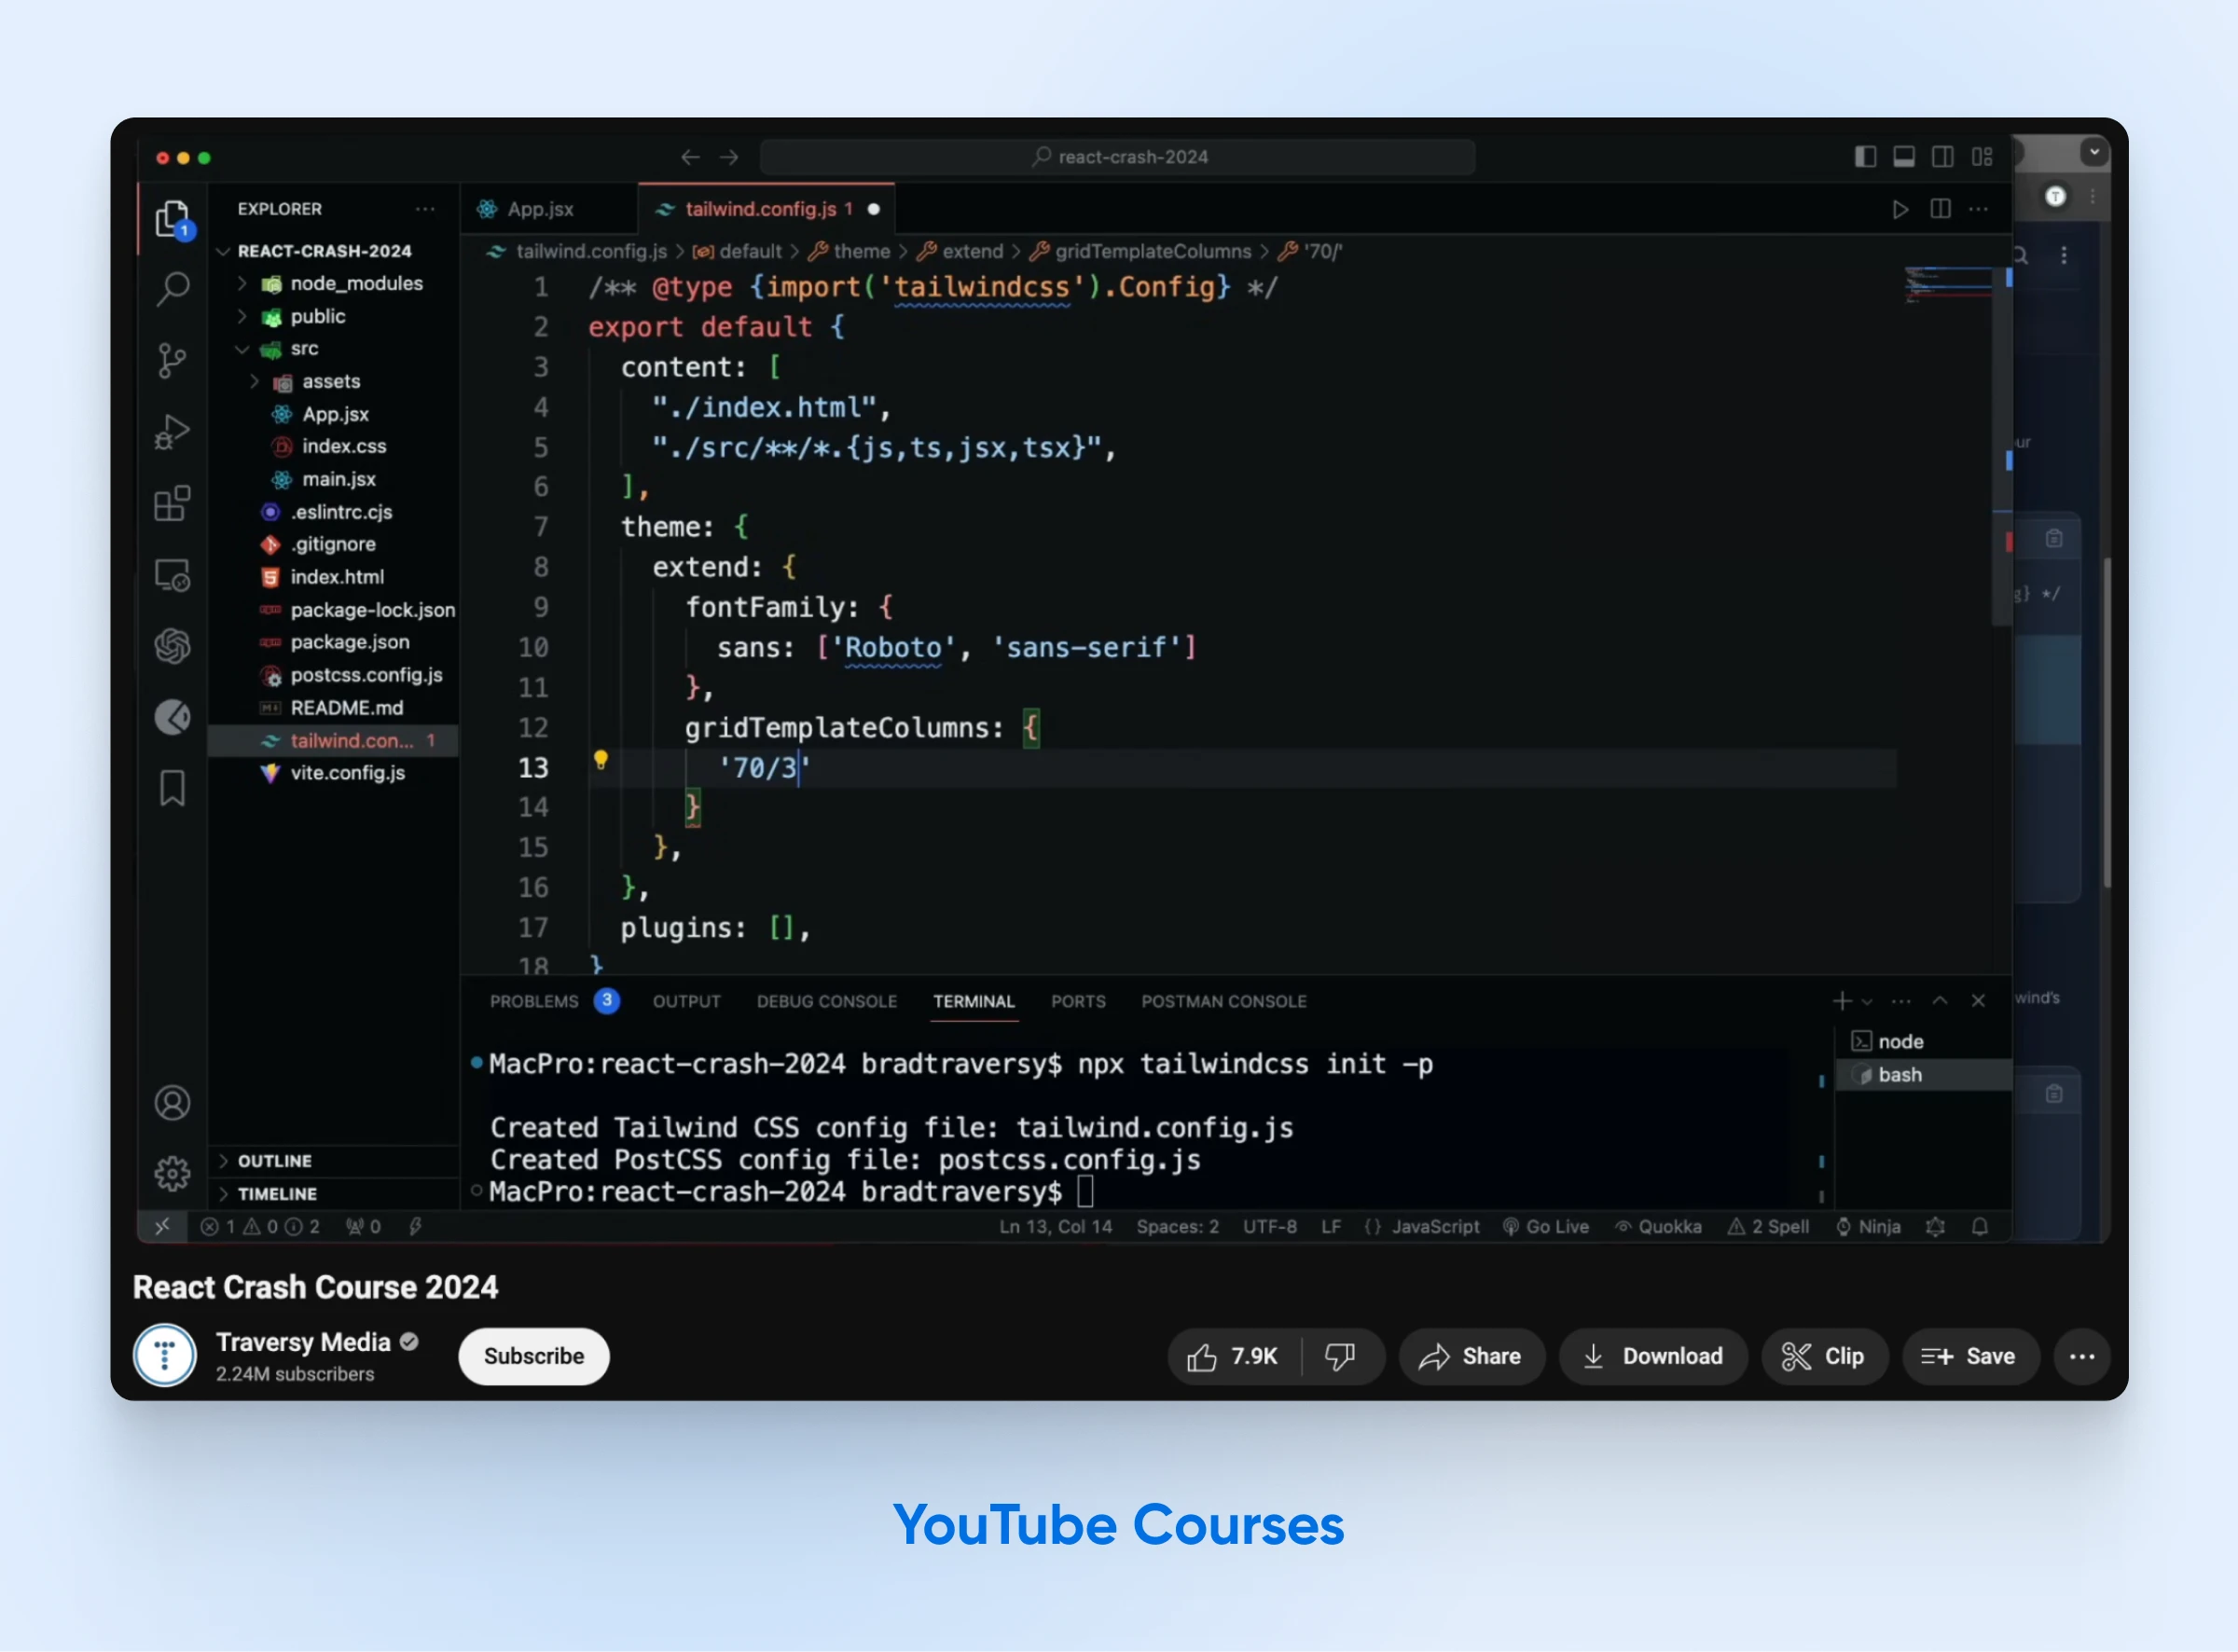 A coding still from Traversy Media's React Crash Course on YouTube is shown